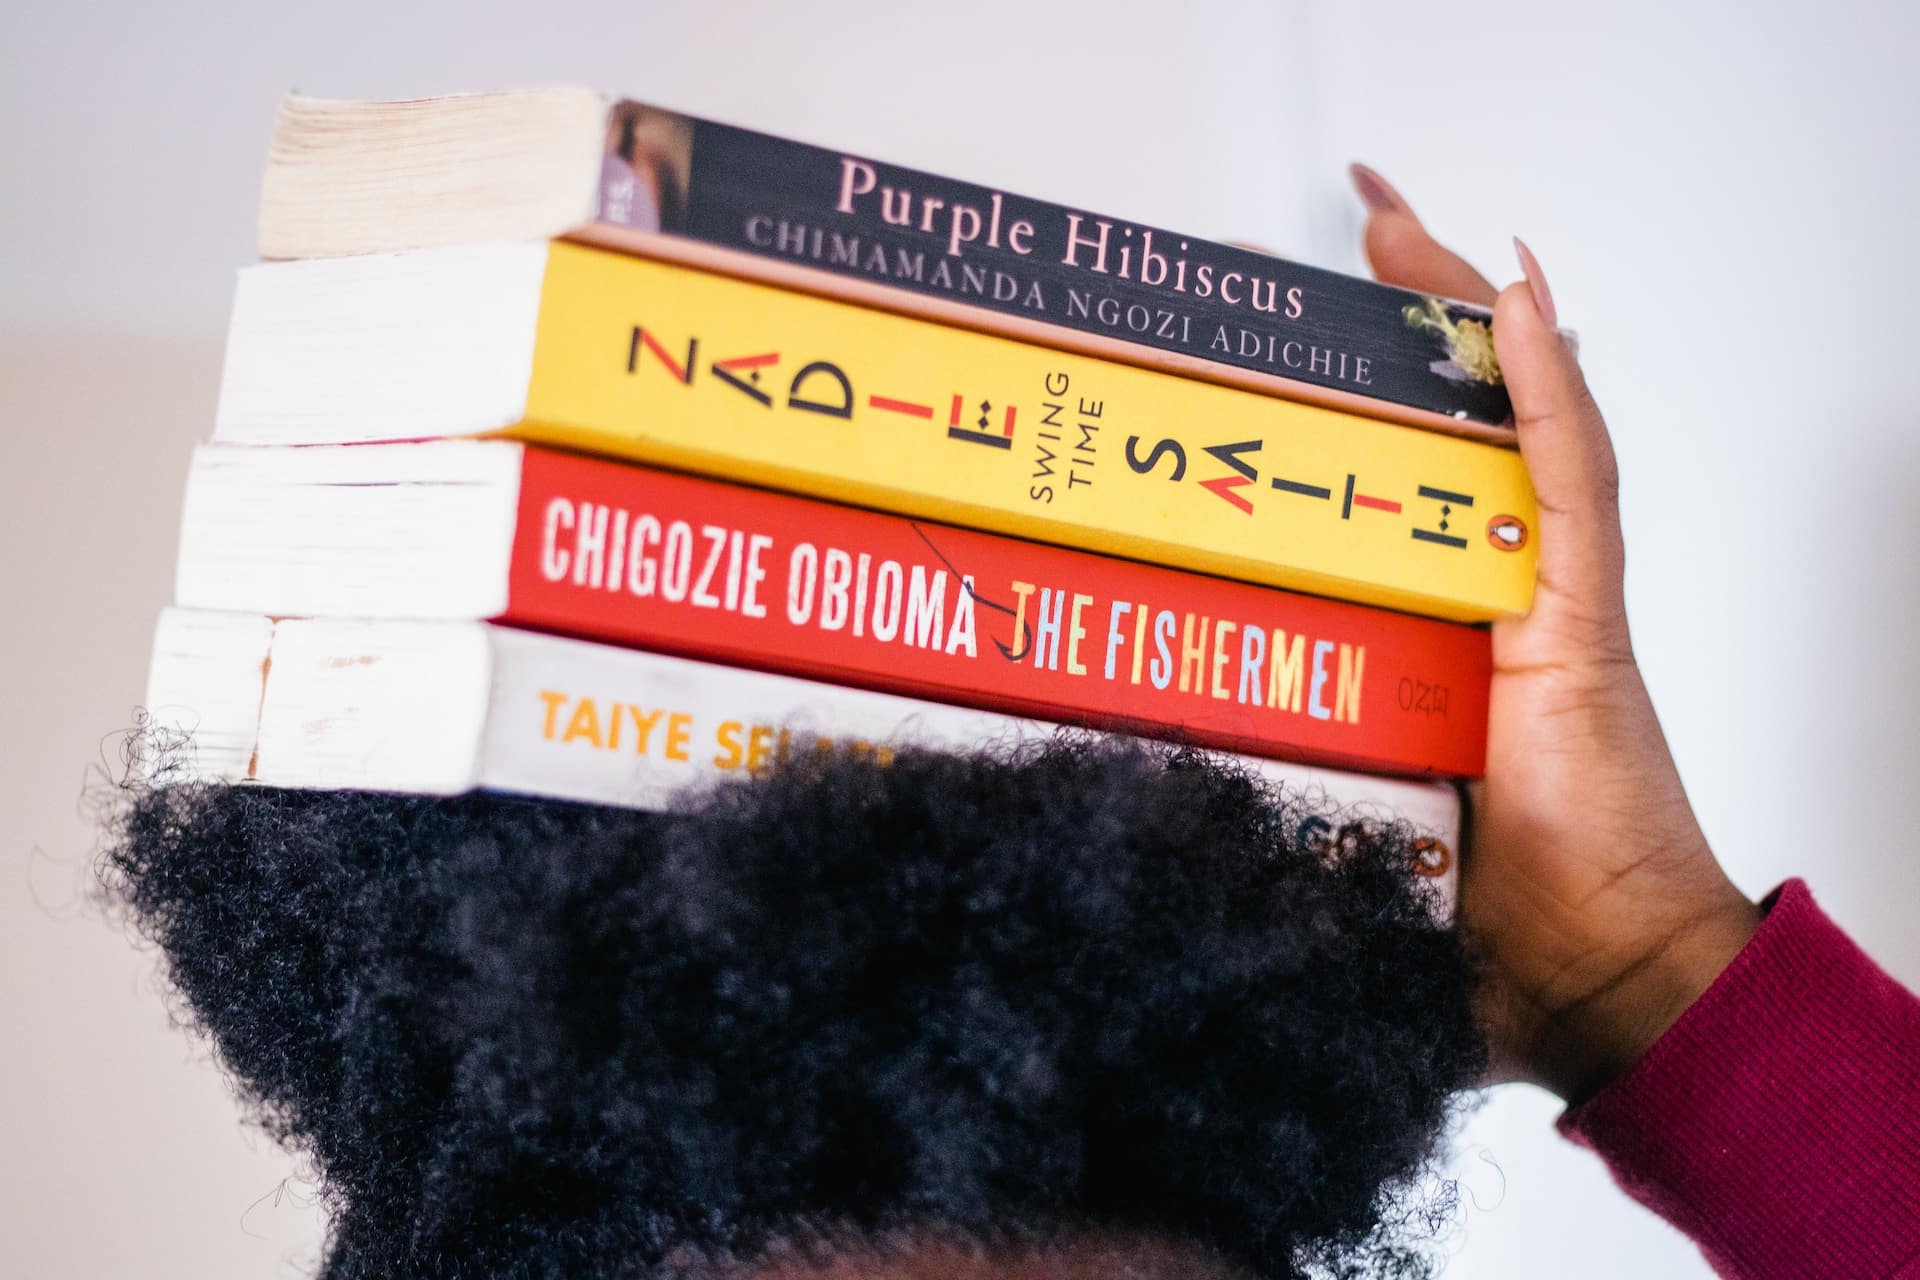 African authors